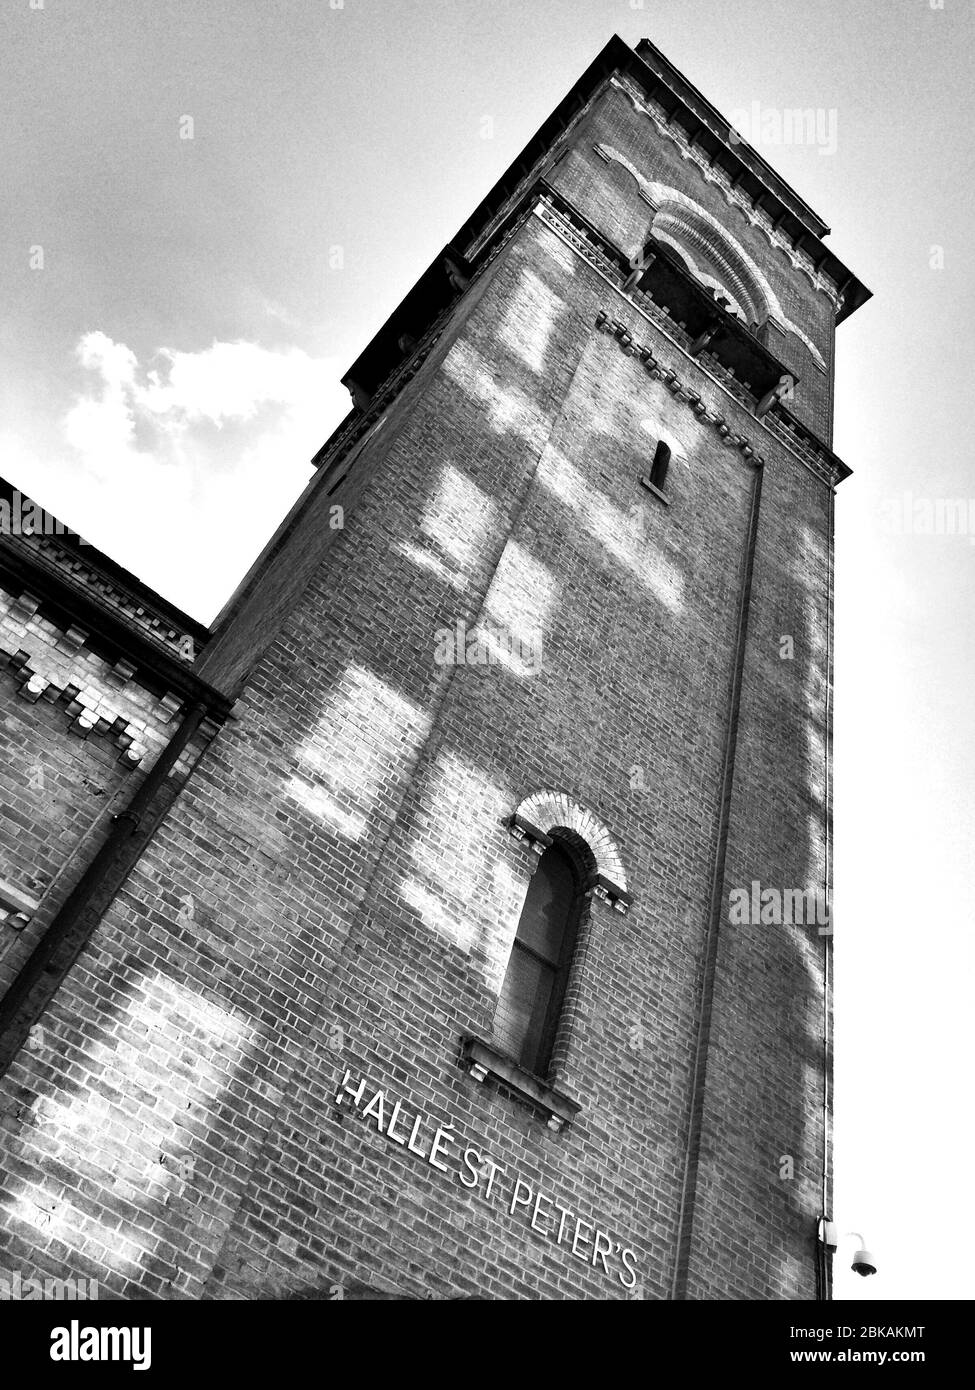 The Halle St Peters, Ancoats, Manchester. Foto Stock